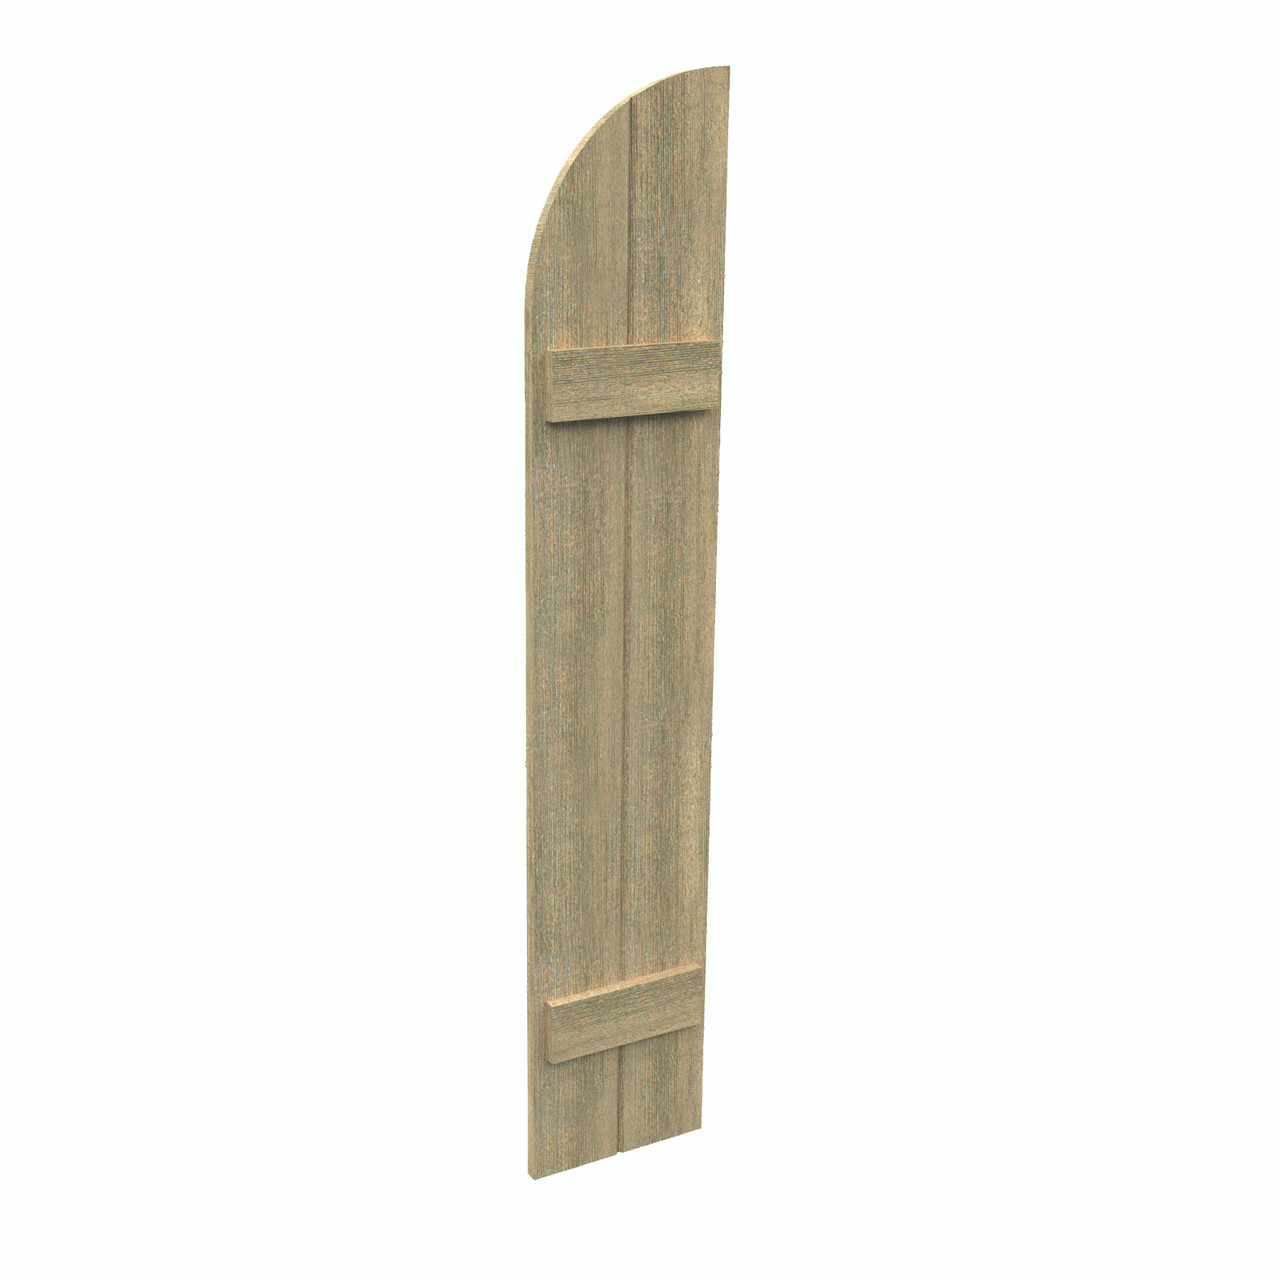 12 inch by 32 inch Quarter Round Shutter with 2-Boards